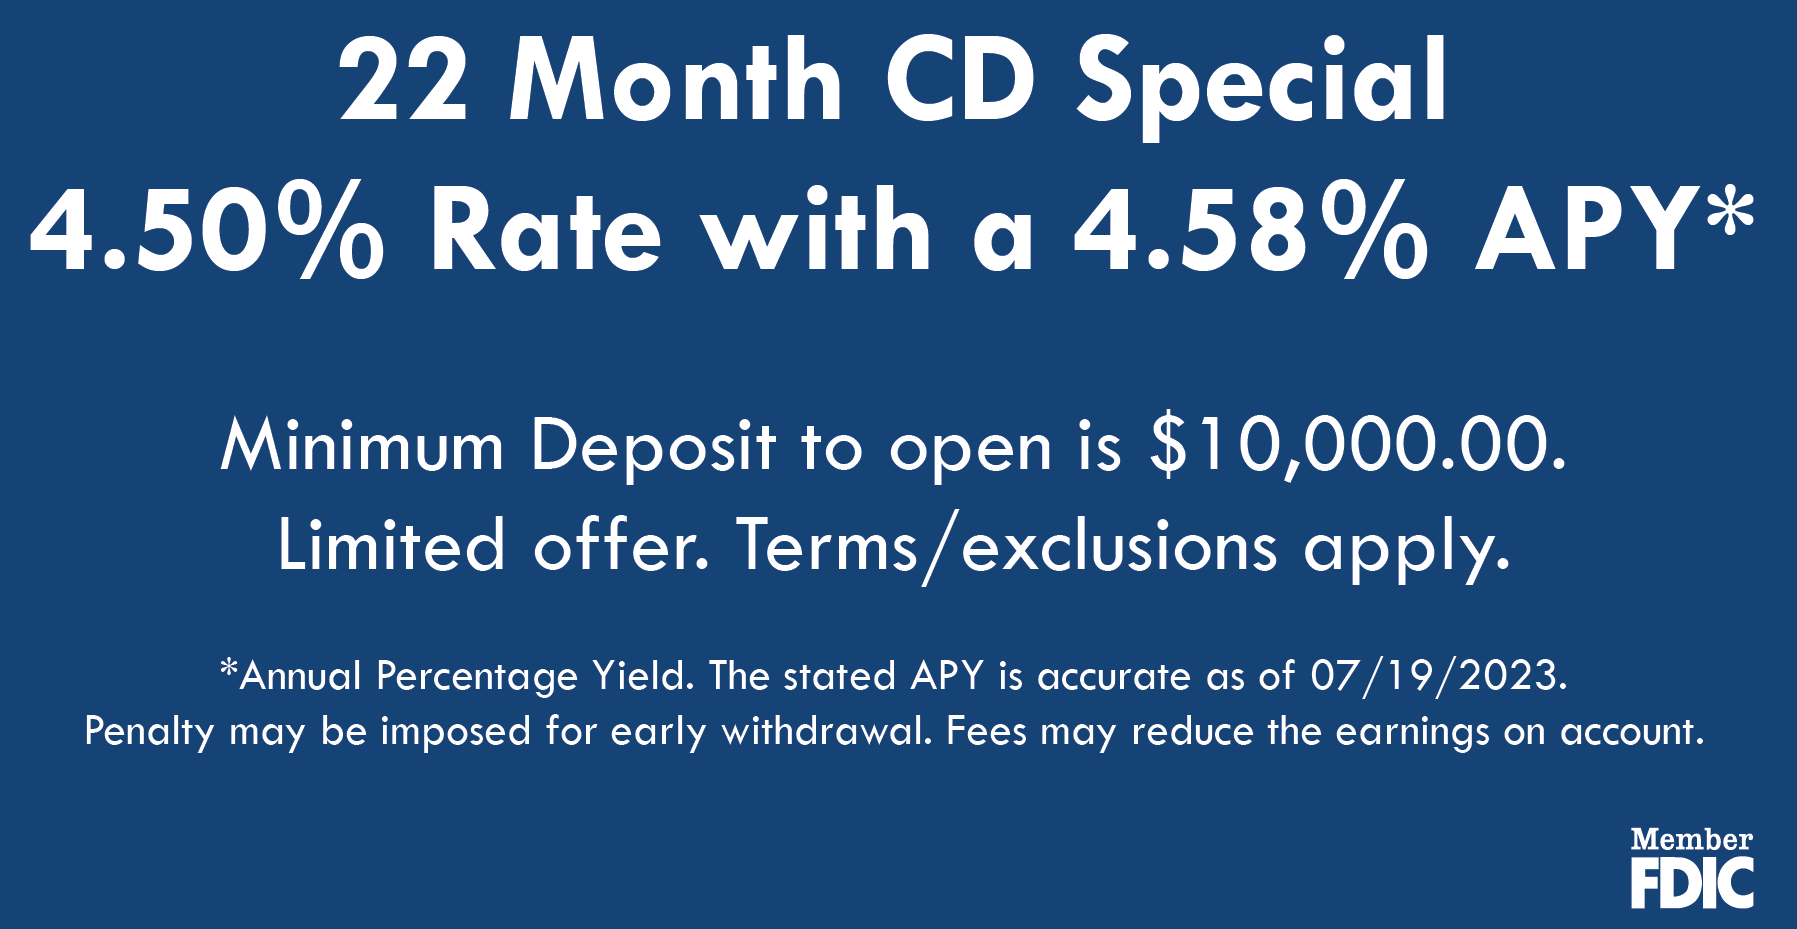 22 Month CD Special